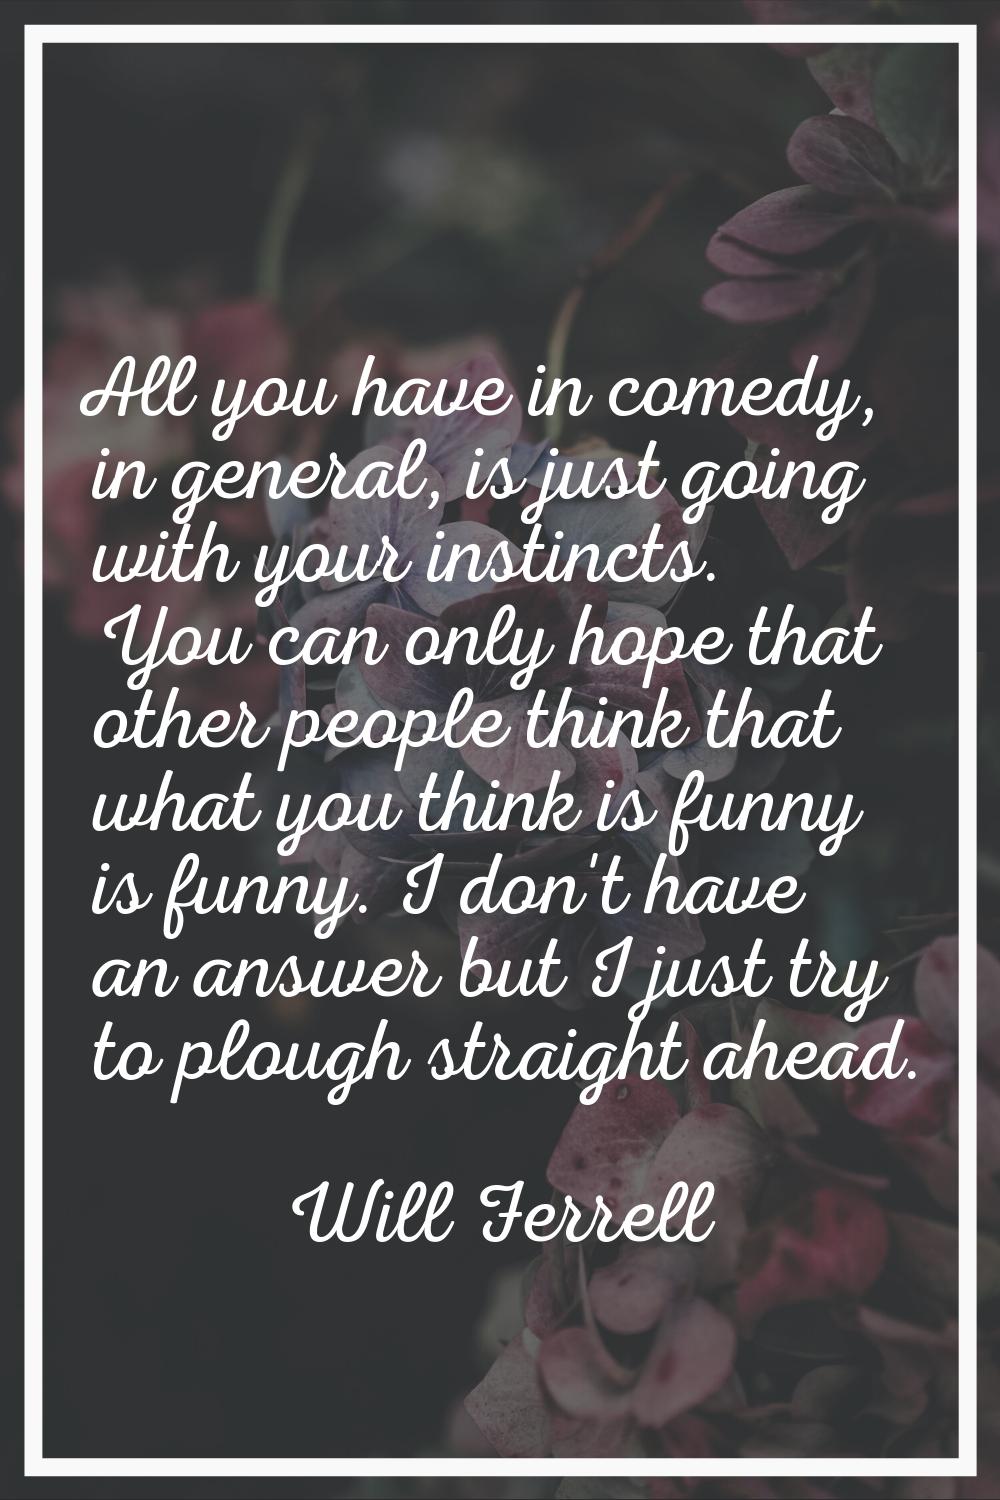 All you have in comedy, in general, is just going with your instincts. You can only hope that other